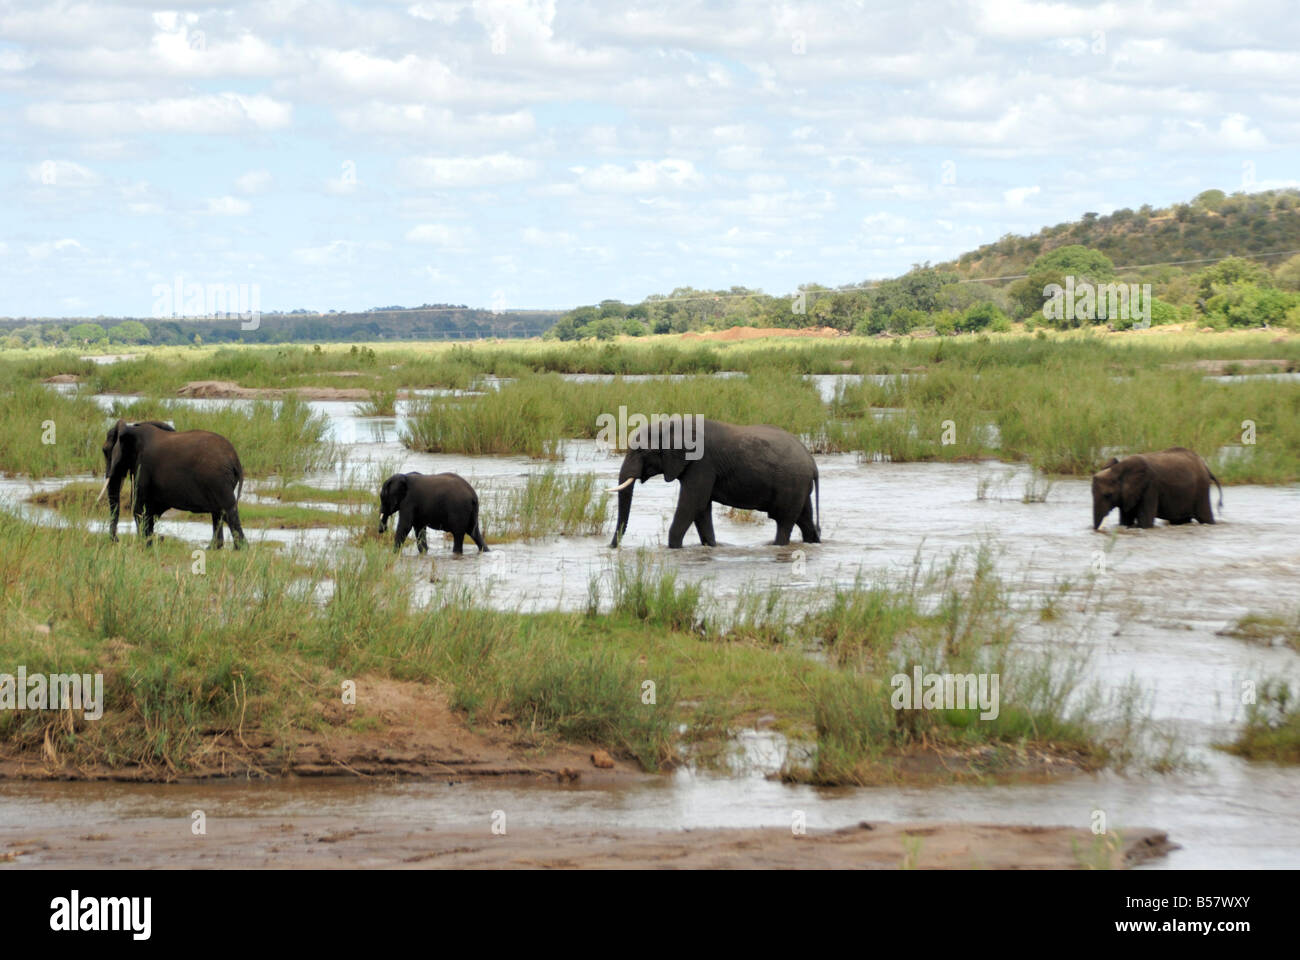 Elephants in Oliphants River, Kruger National Park, South Africa, Africa Stock Photo